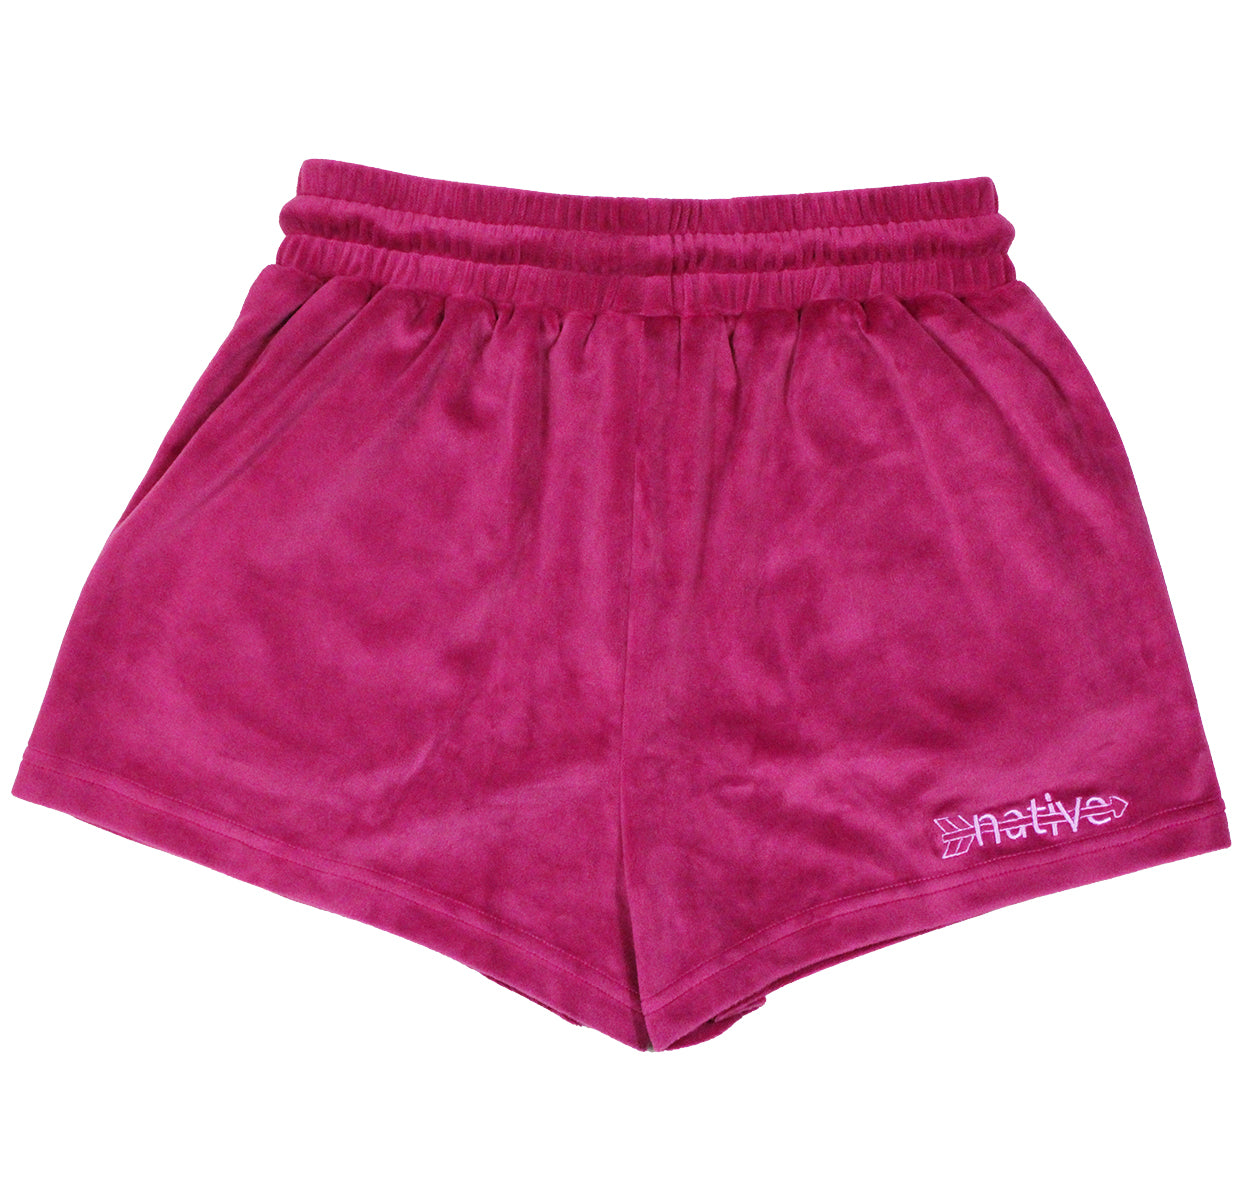 velour shorties in orchid